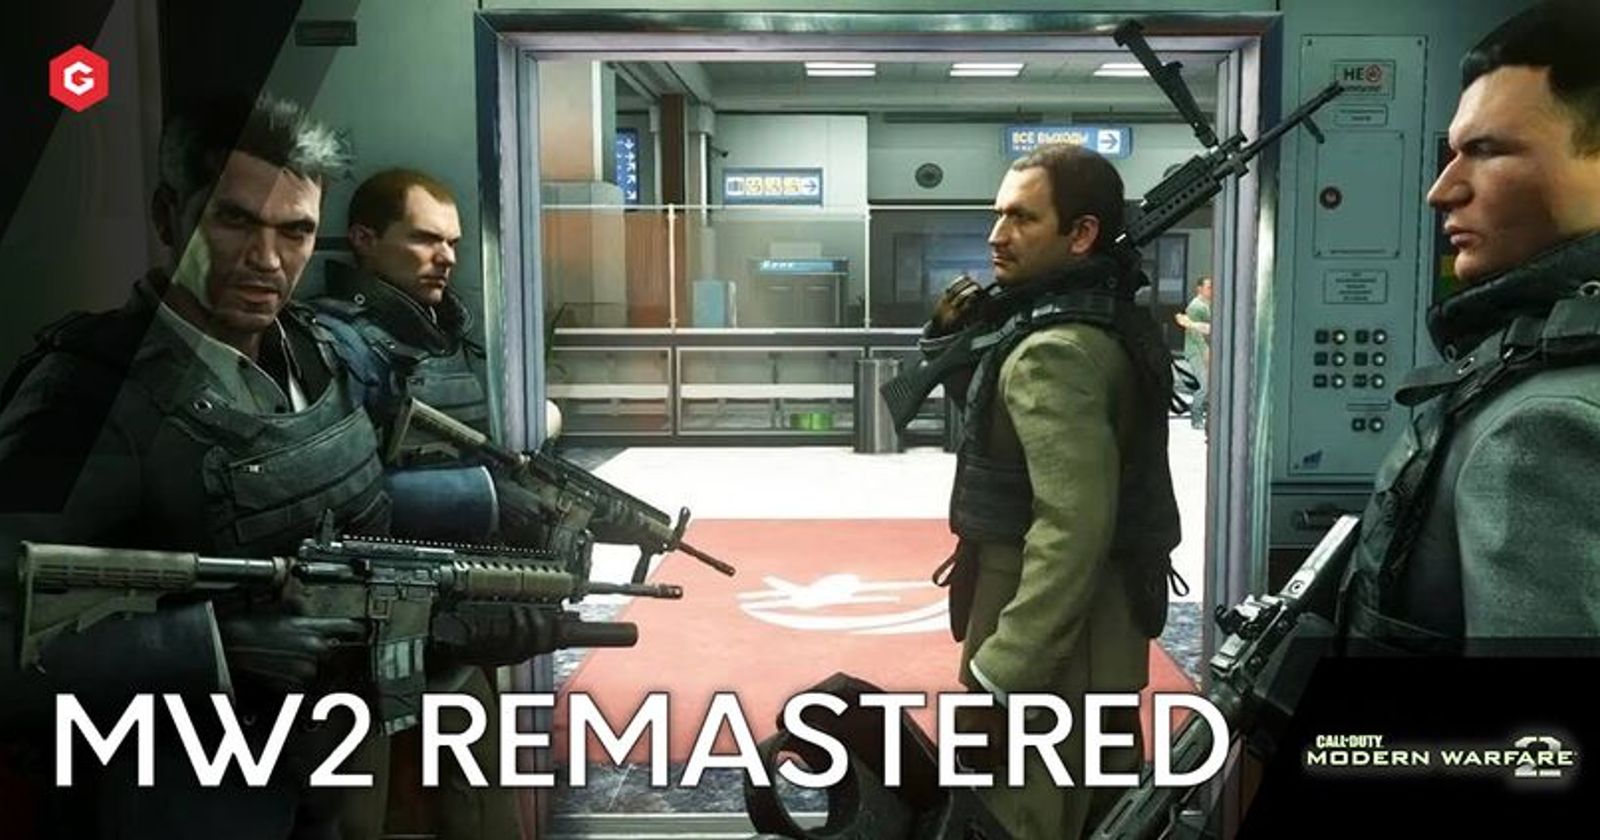 When is Call of Duty: MW2 Remastered coming out? Rumors, release